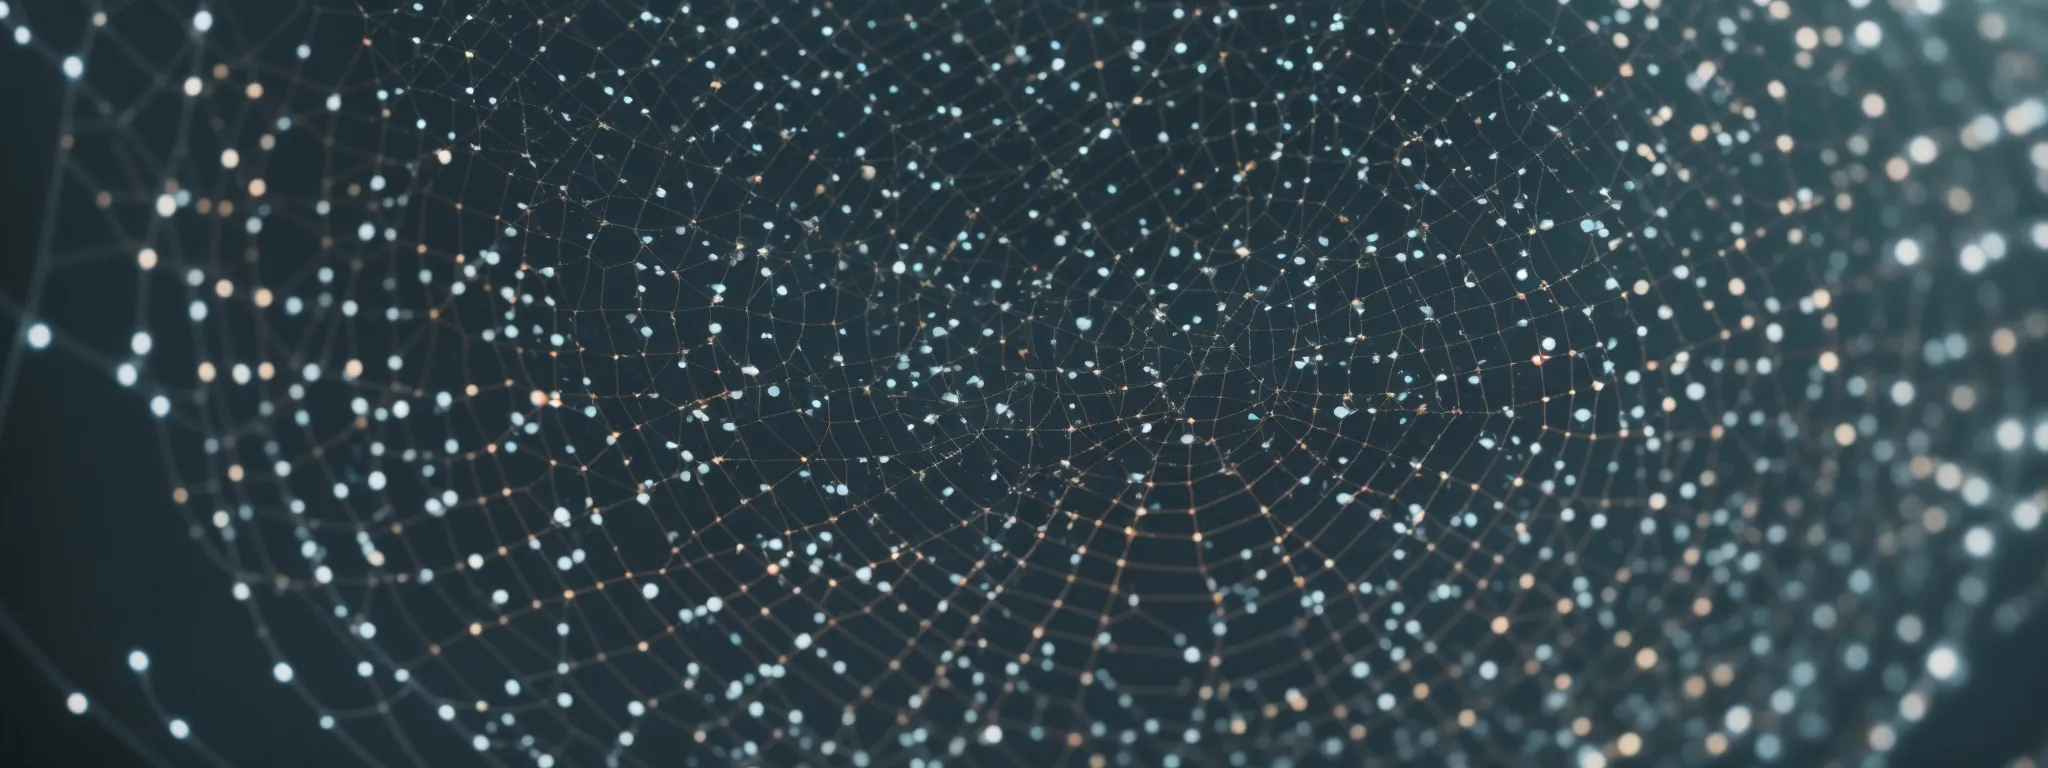 a magnifying glass hovering over a web of interconnected dots and lines, symbolizing the scrutiny of backlink networks.